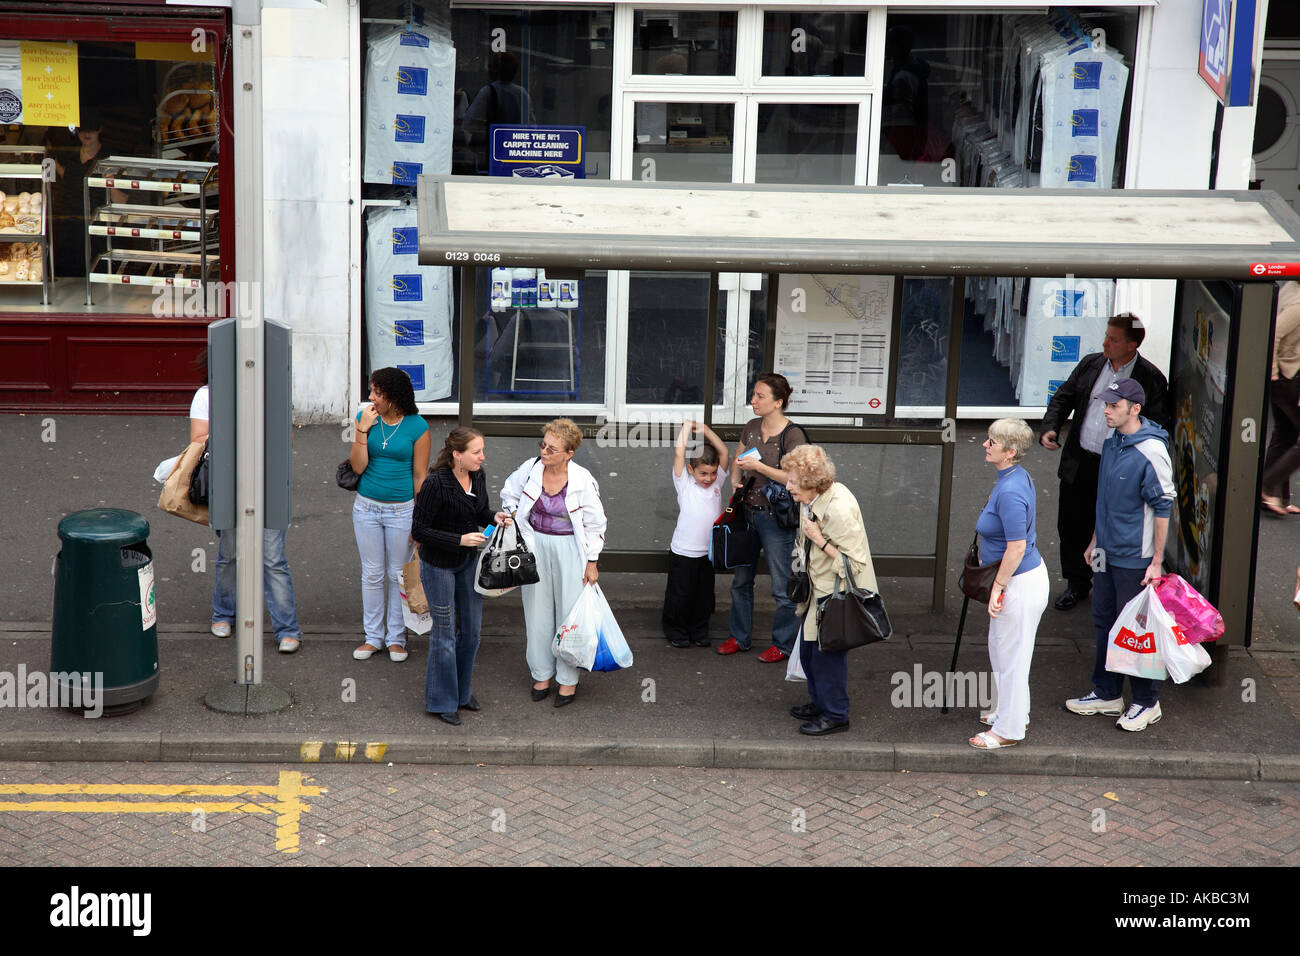 People waiting at a bus stop in London Uk. Stock Photo